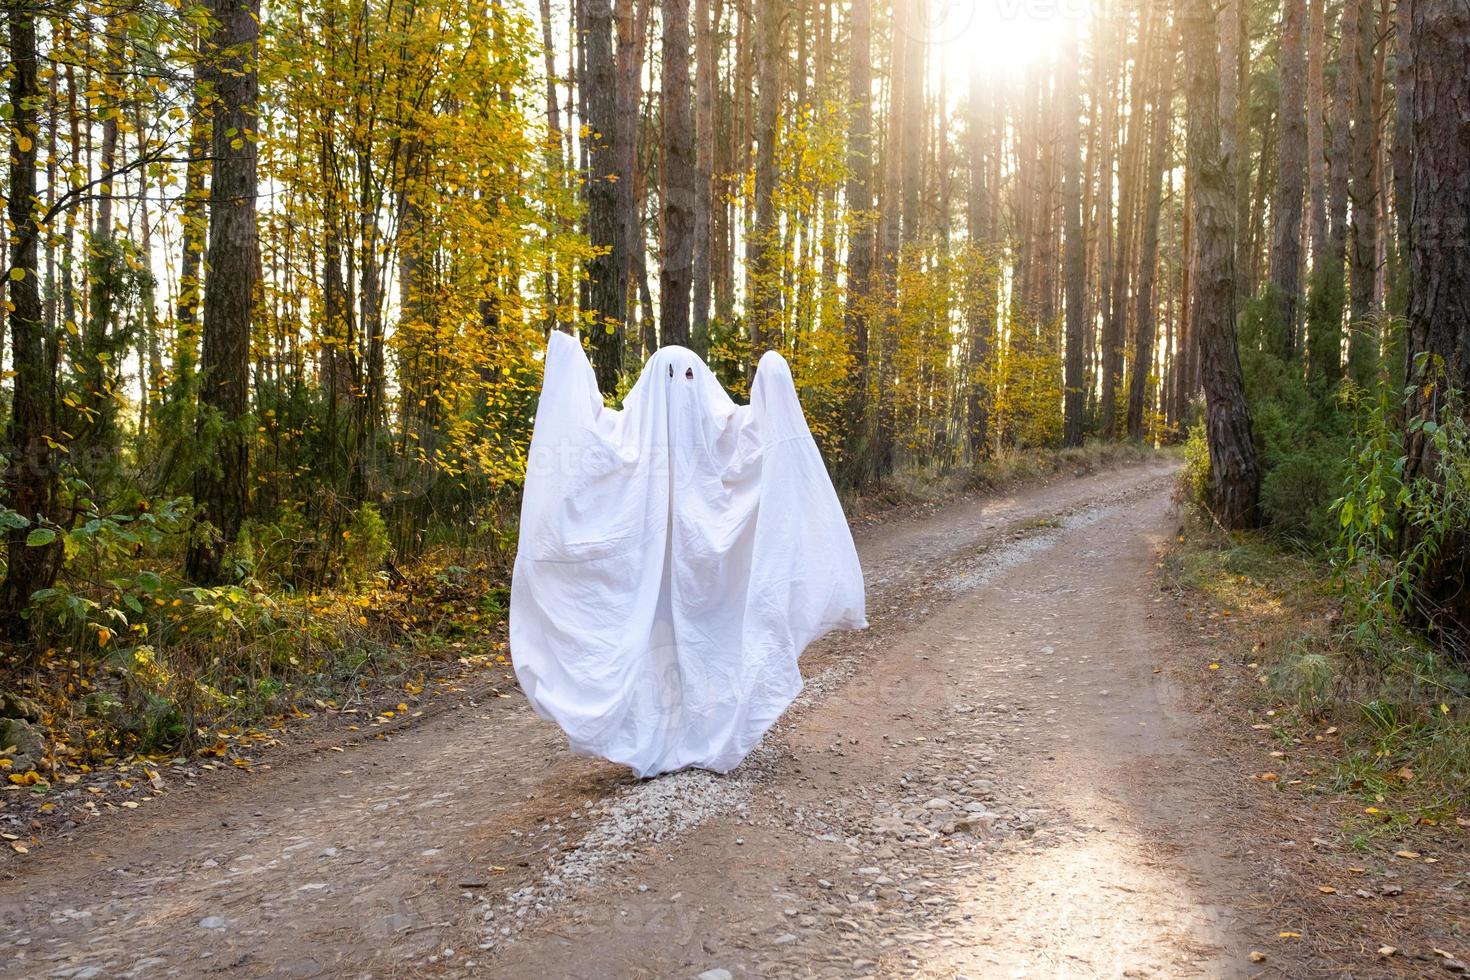 A child in sheets with cutout for eyes like a ghost costume in an autumn forest scares and terrifies. A kind little funny ghost. Halloween Party photo